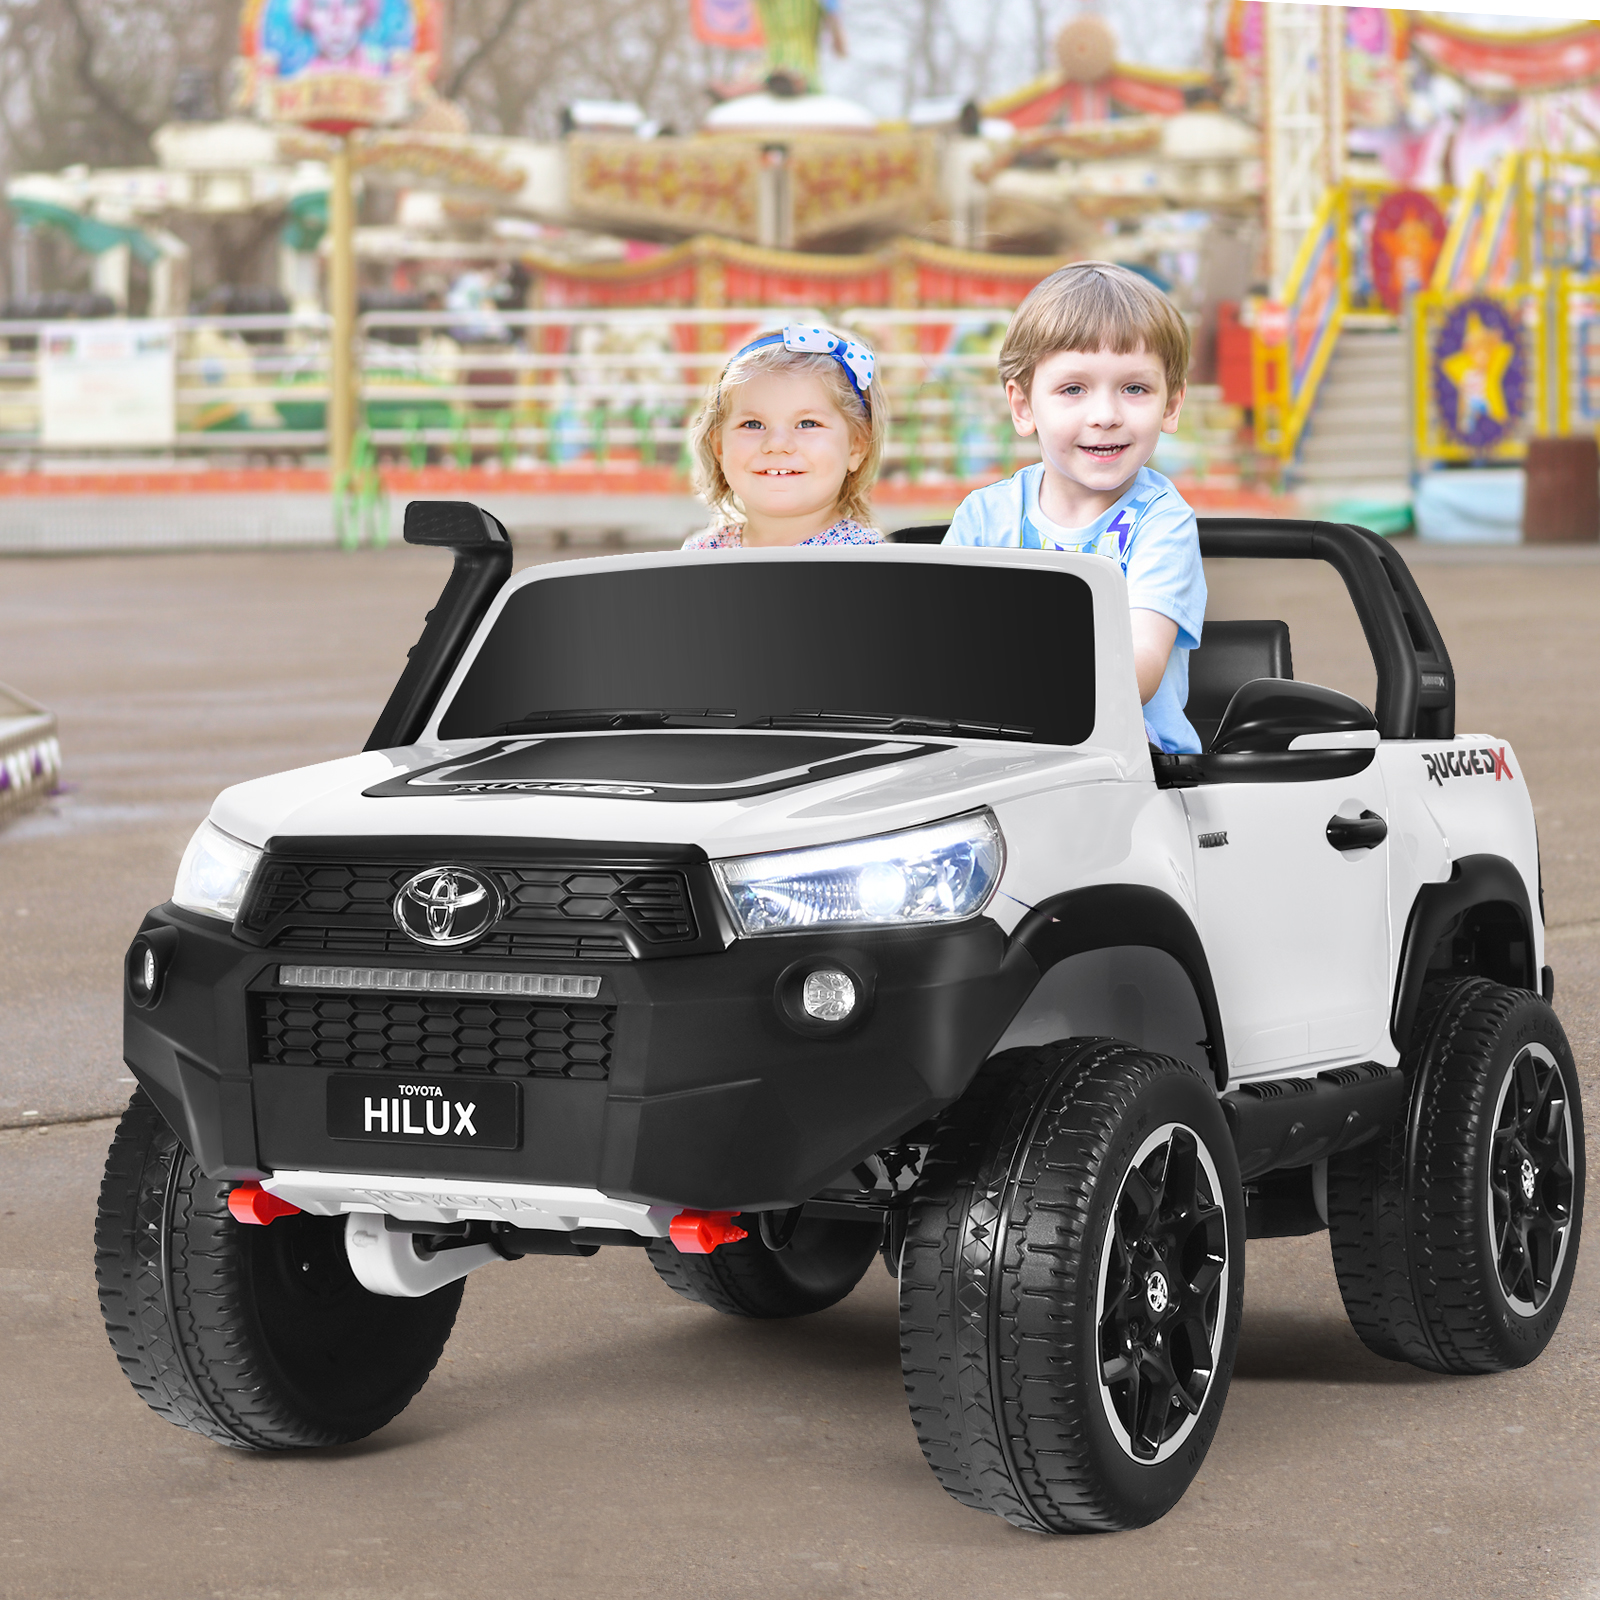 Infans 2*12V Licensed Toyota Hilux Ride On Truck Car 2-Seater 4WD Remote Control White - image 3 of 7